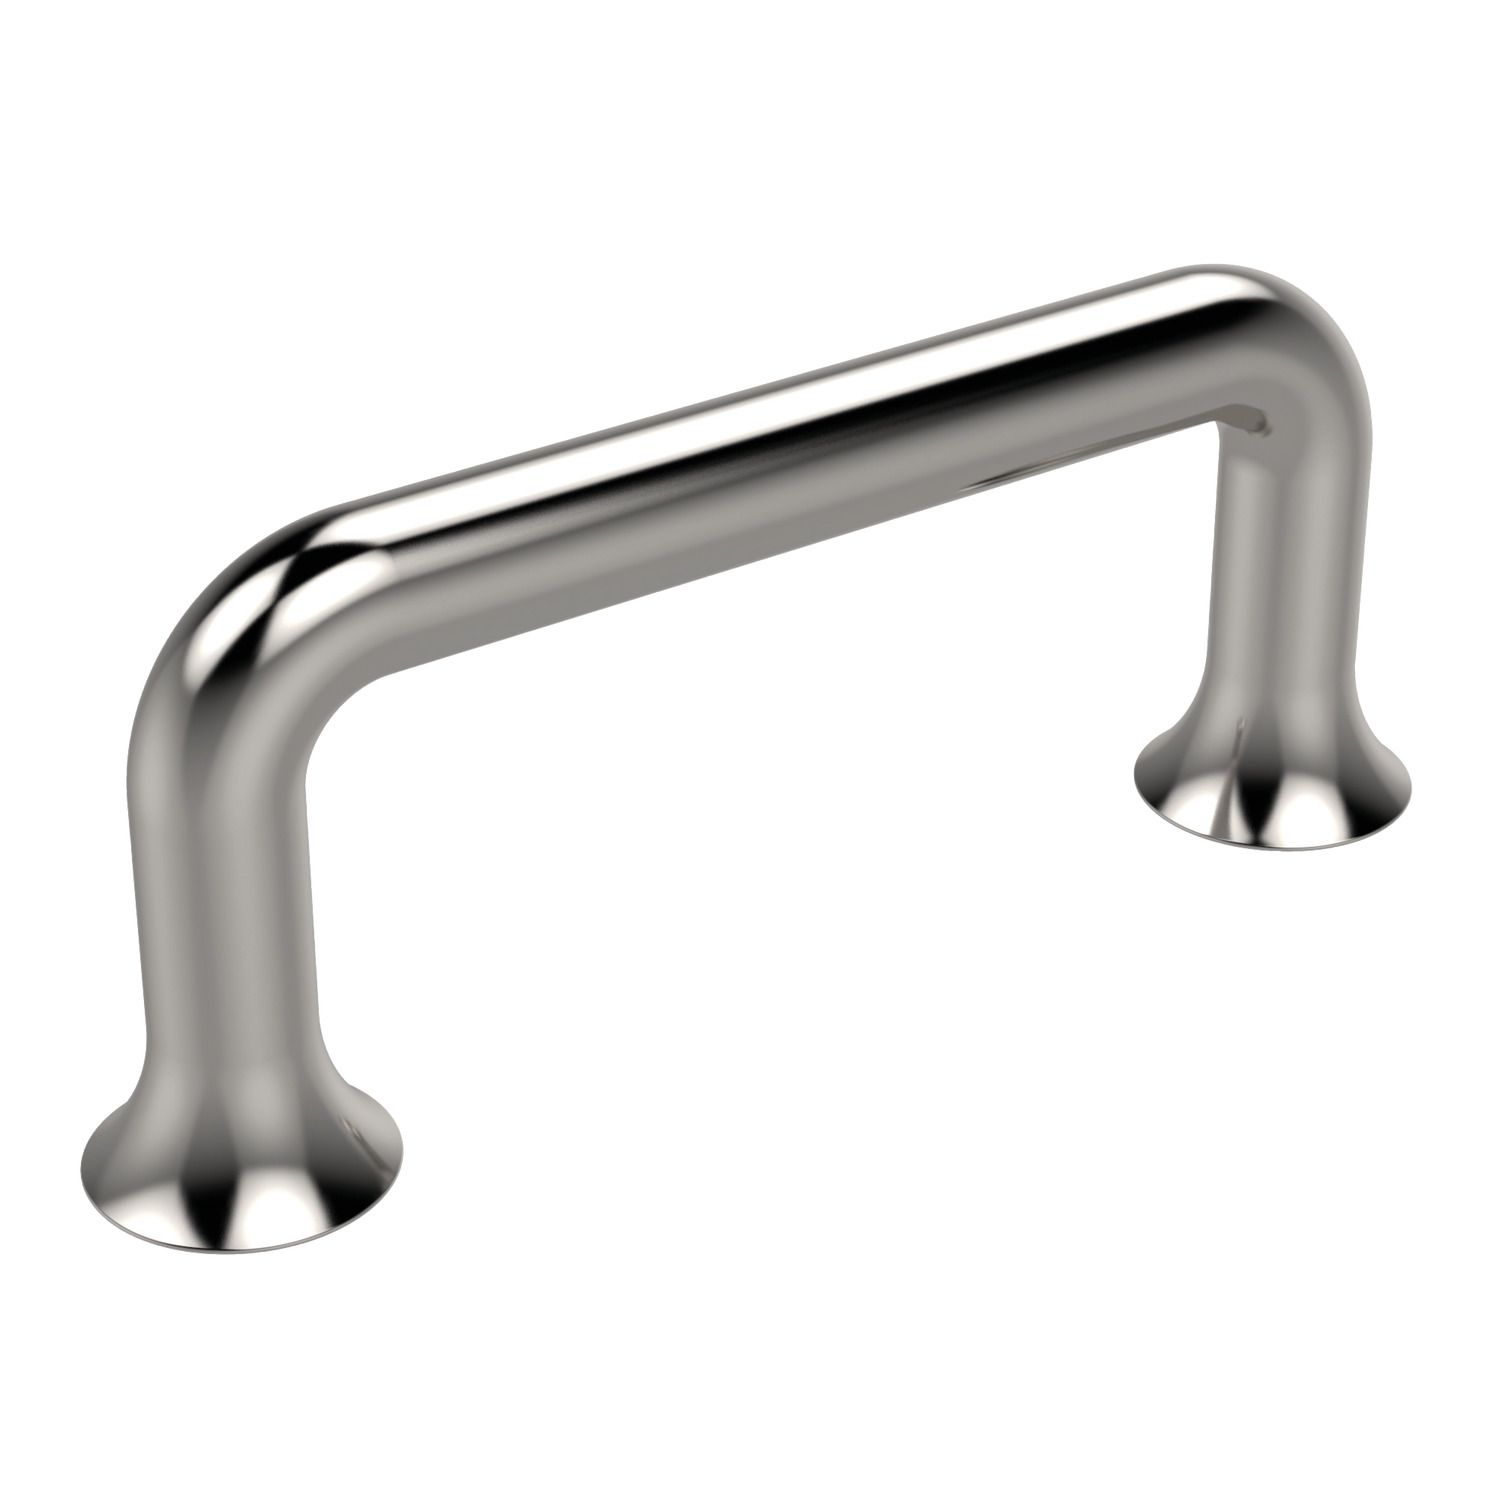 Pull Handles AISI 303 steel with a trumpet like design that makes it easy to clean thoroughly, making them particularly suitable for hygienic areas.